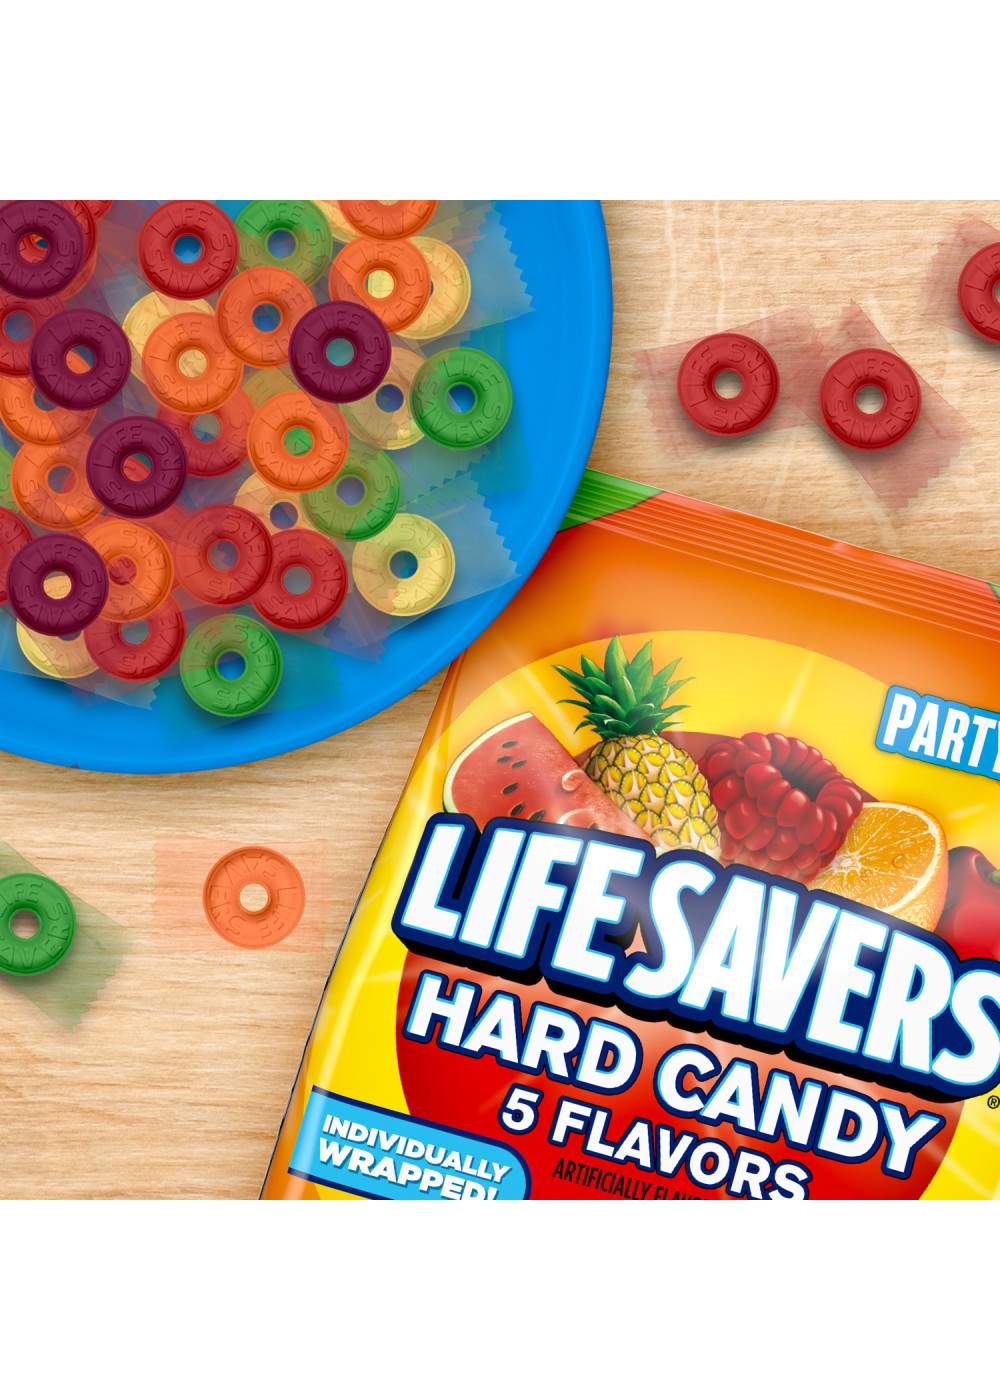 Life Savers Original 5 Flavors Hard Candy - Party Size; image 5 of 7